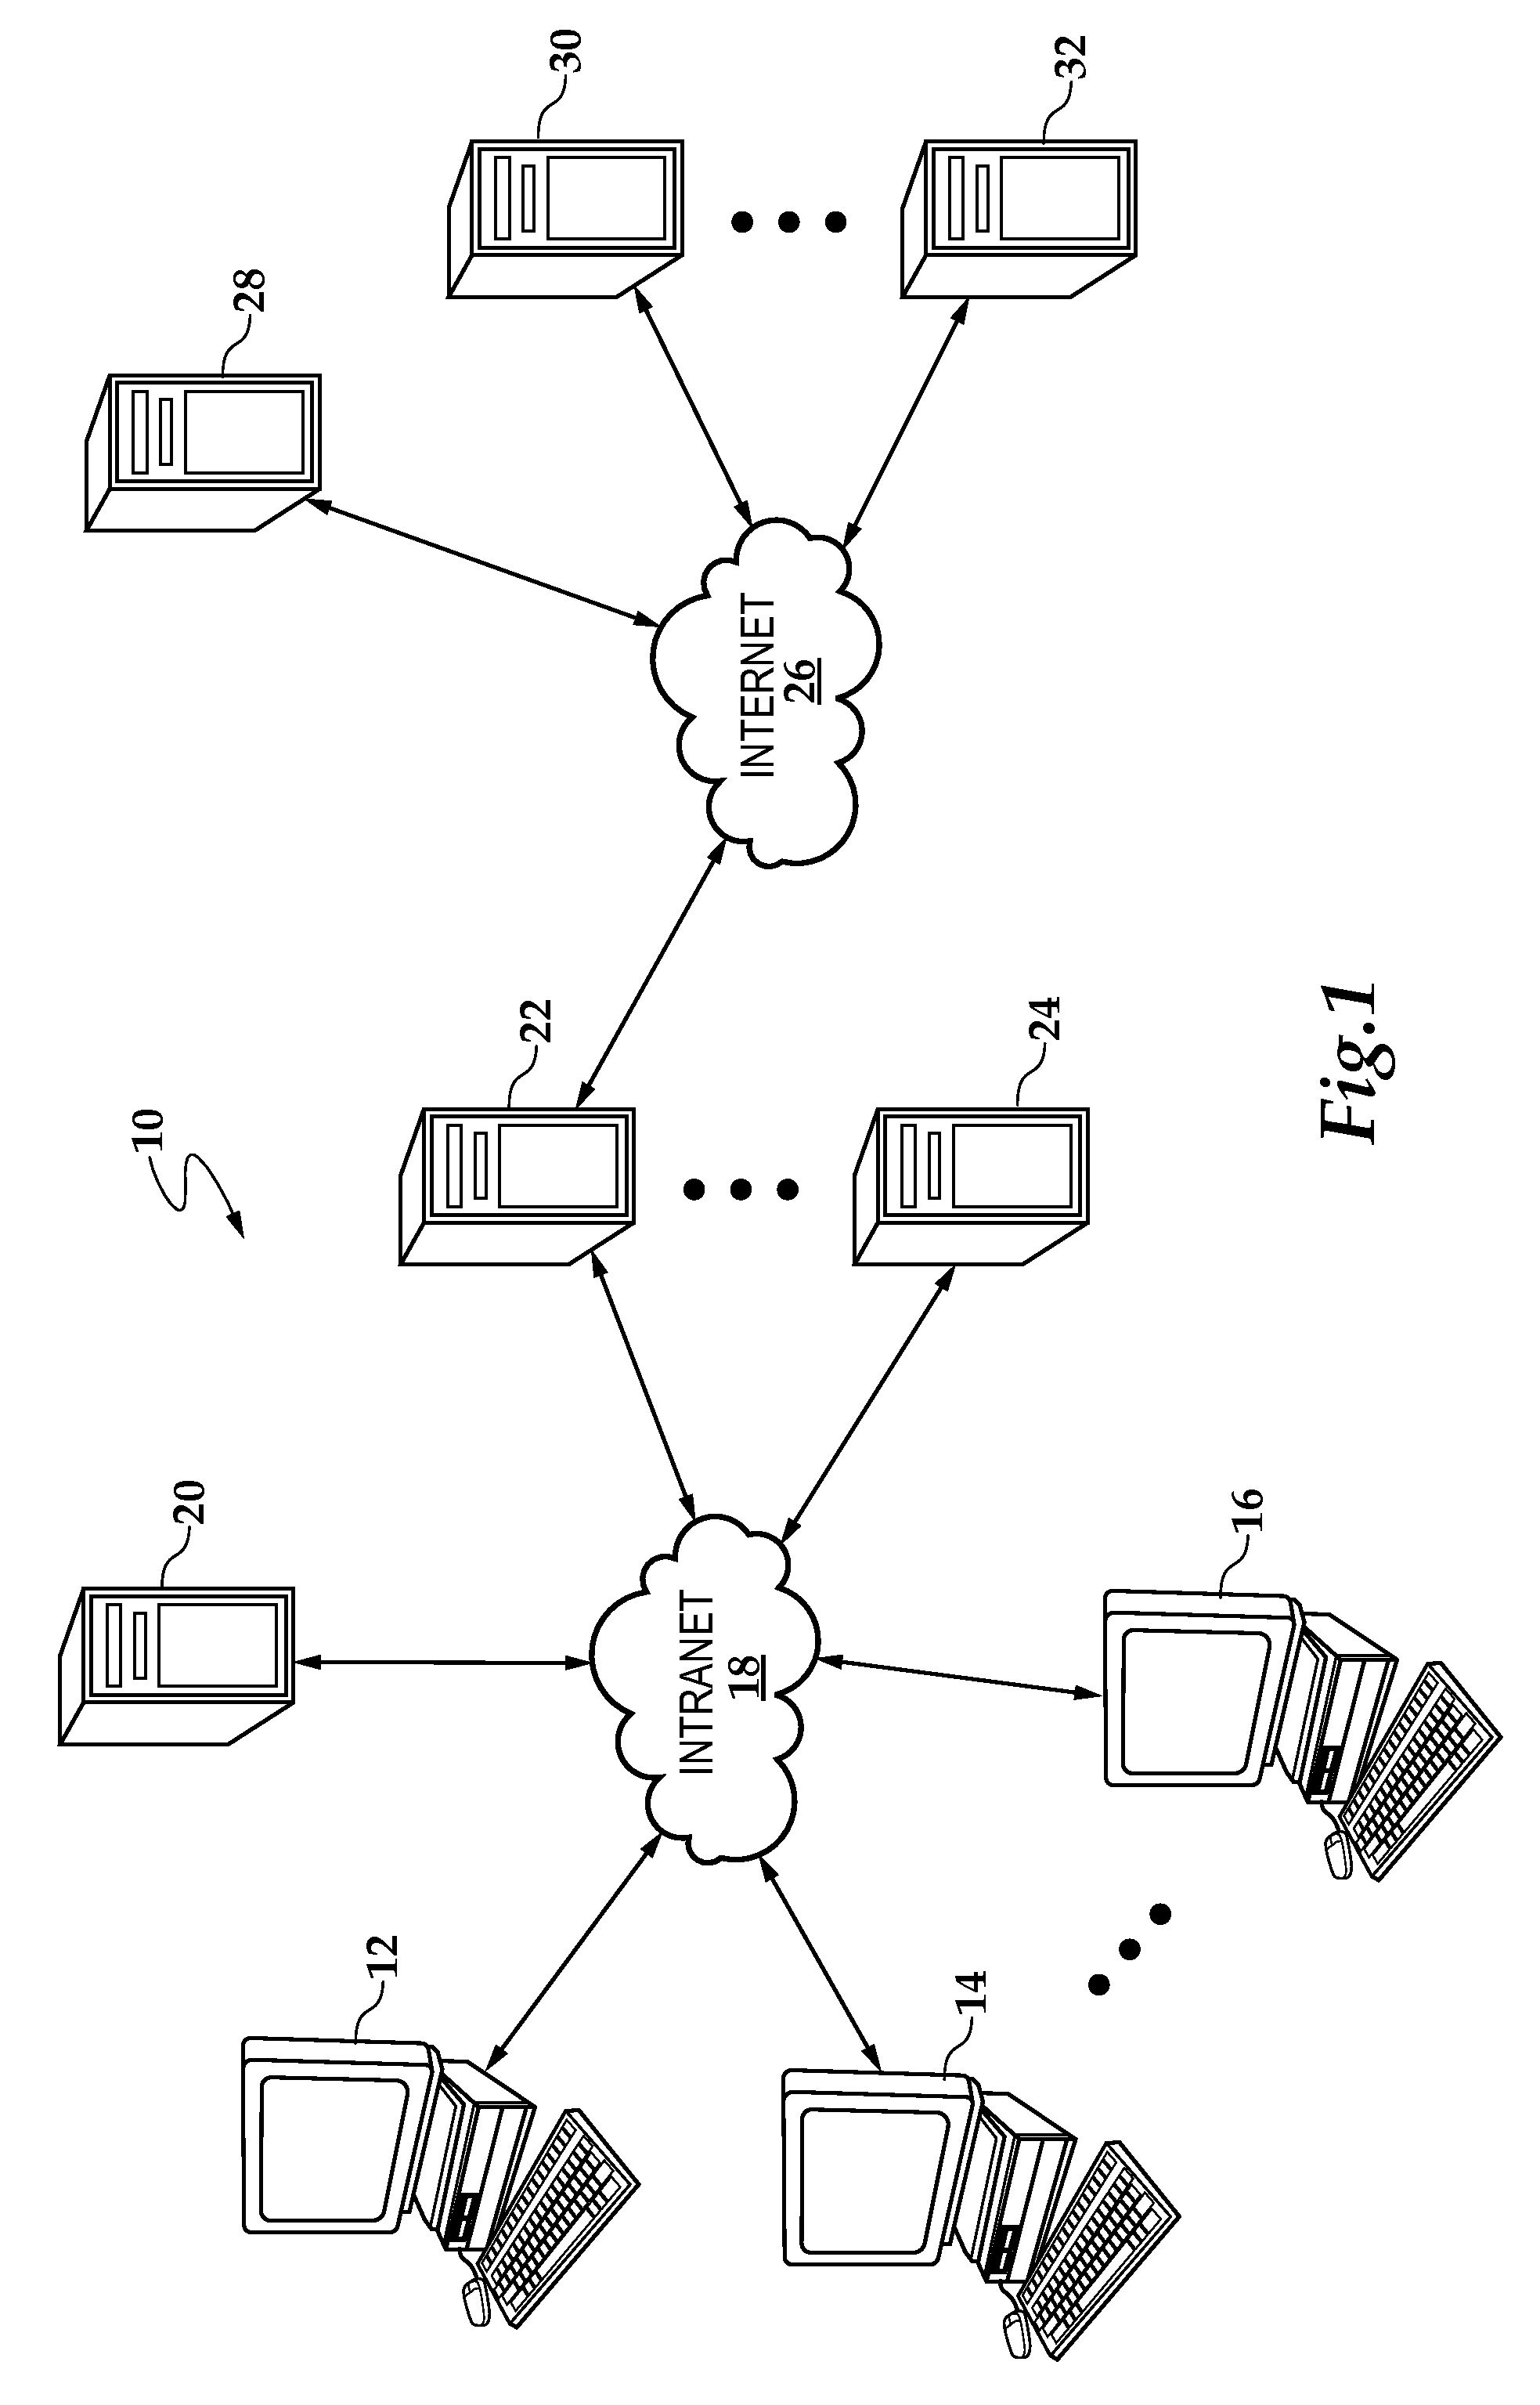 System and Method for User Behavioral Management in a Computing Environment